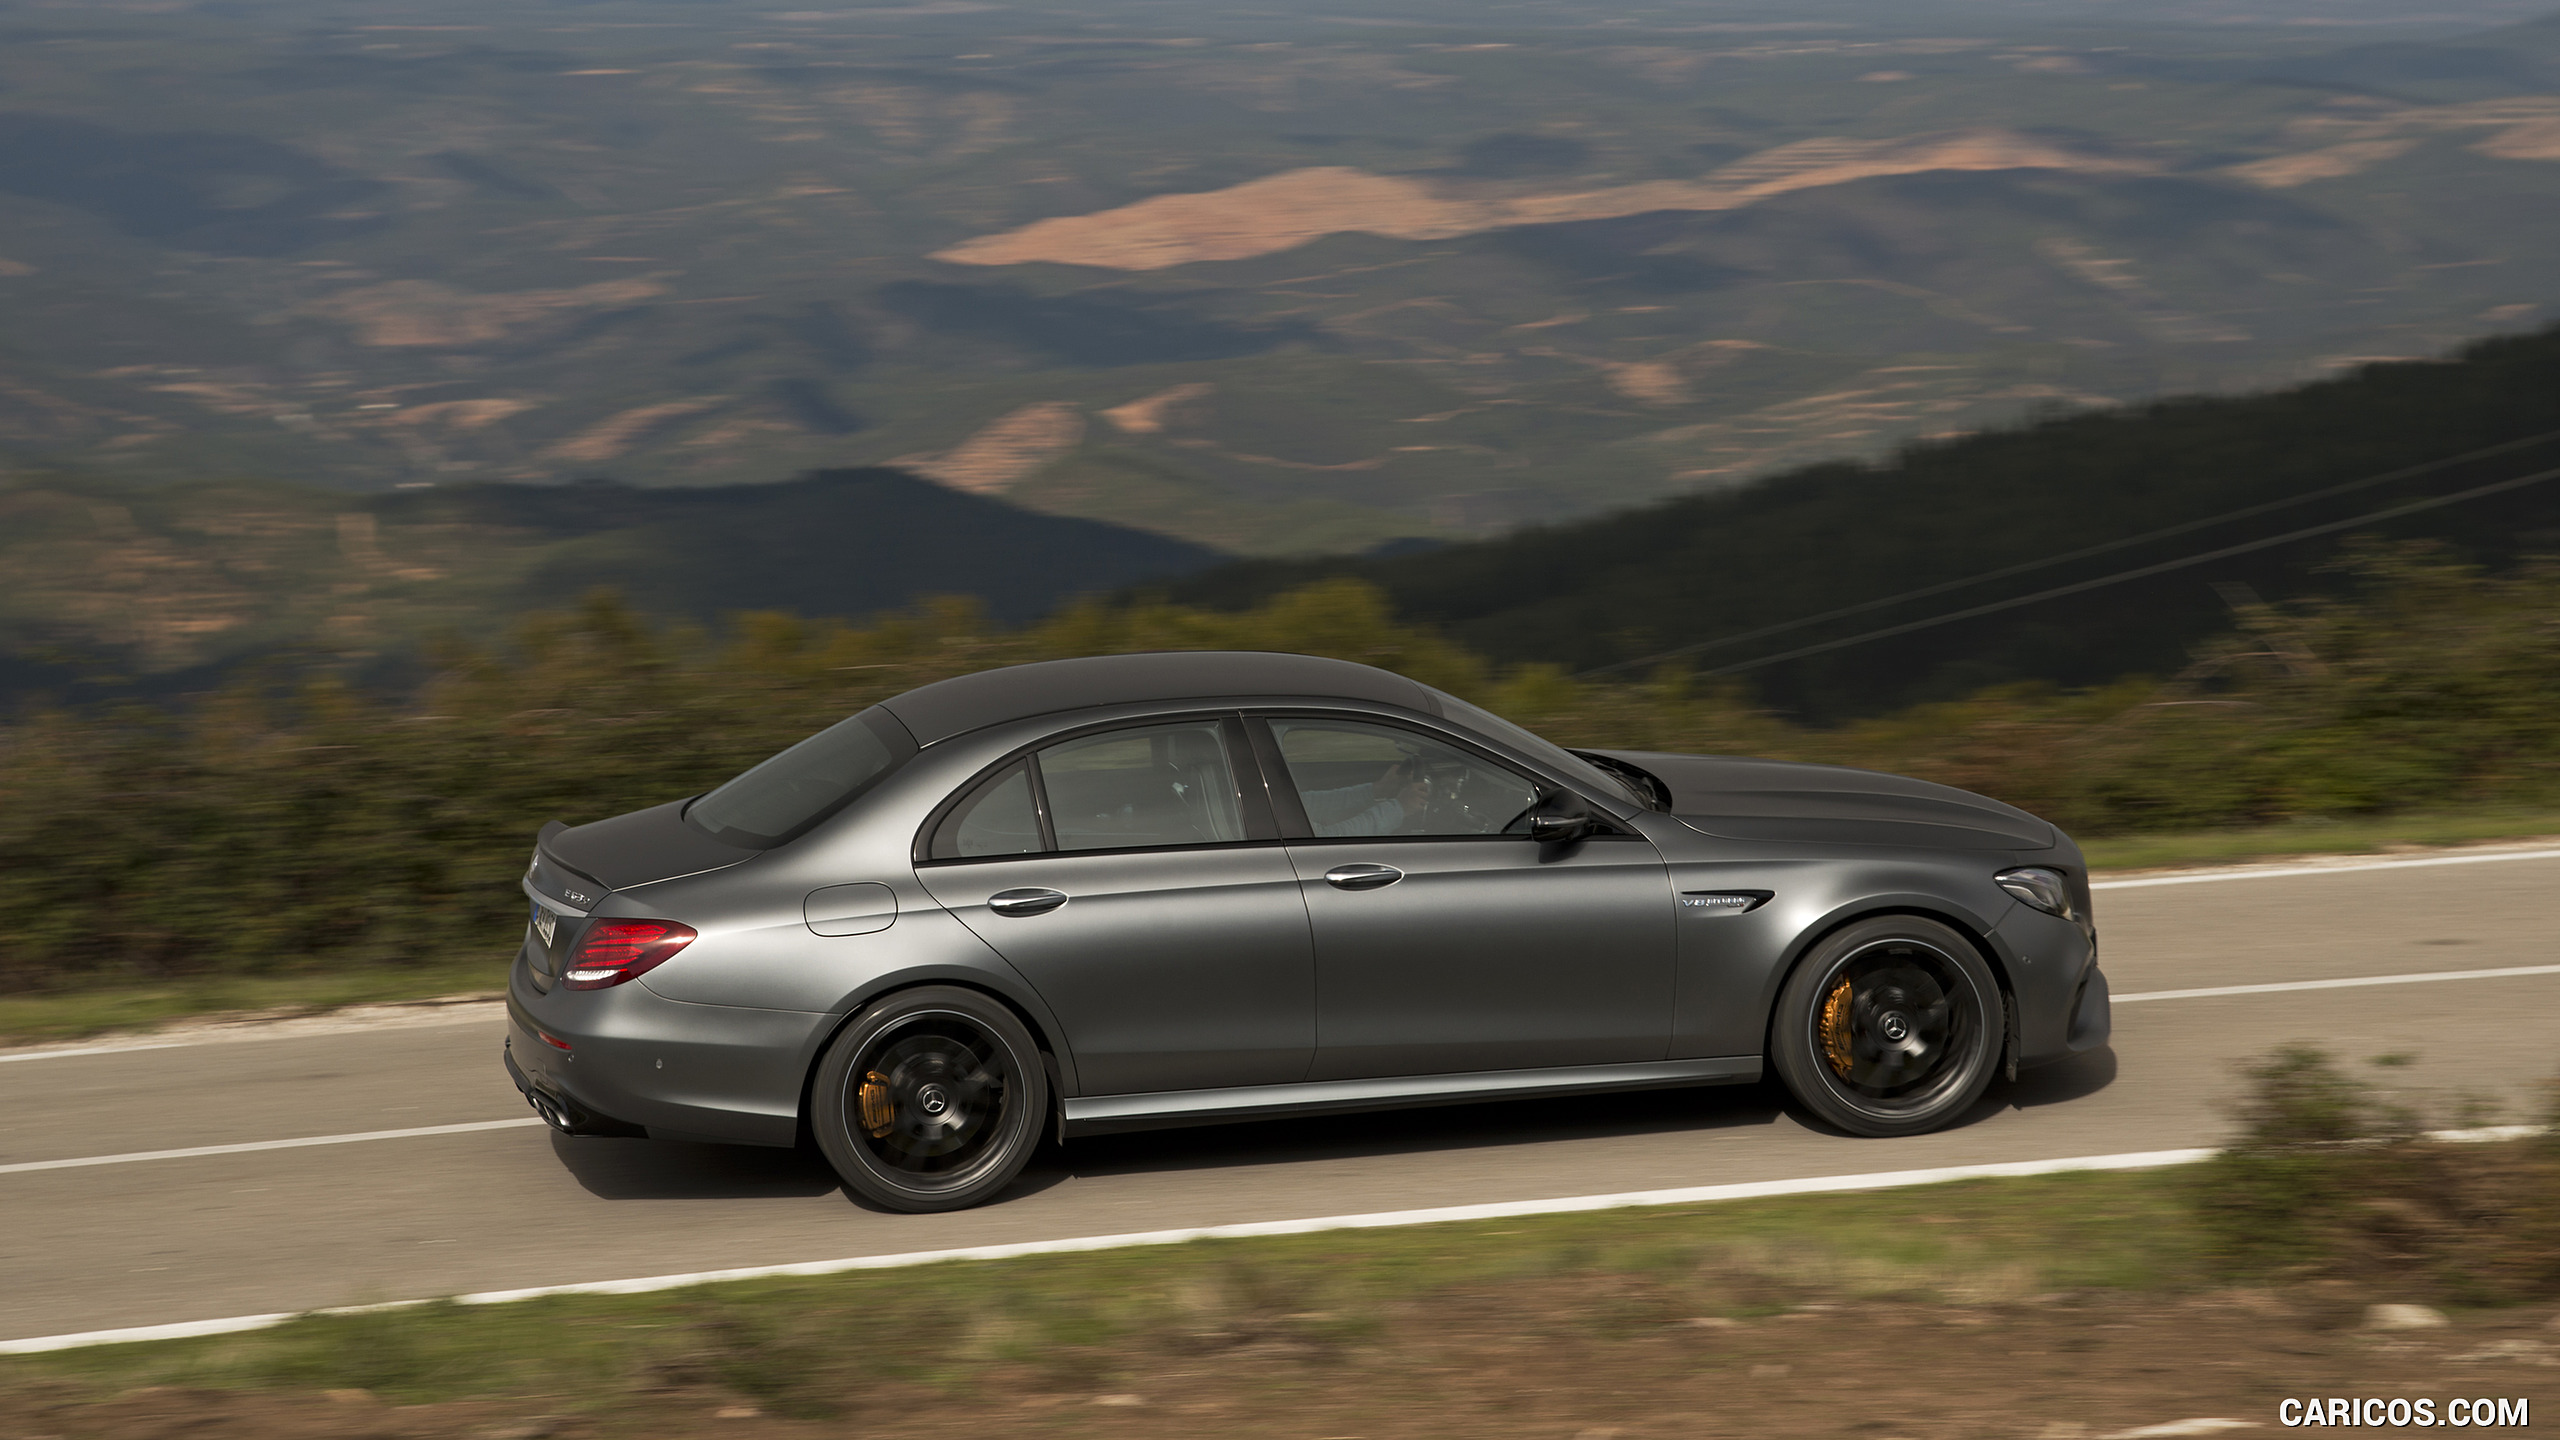 2018 Mercedes-AMG E63 S 4MATIC+ - Side, #295 of 323